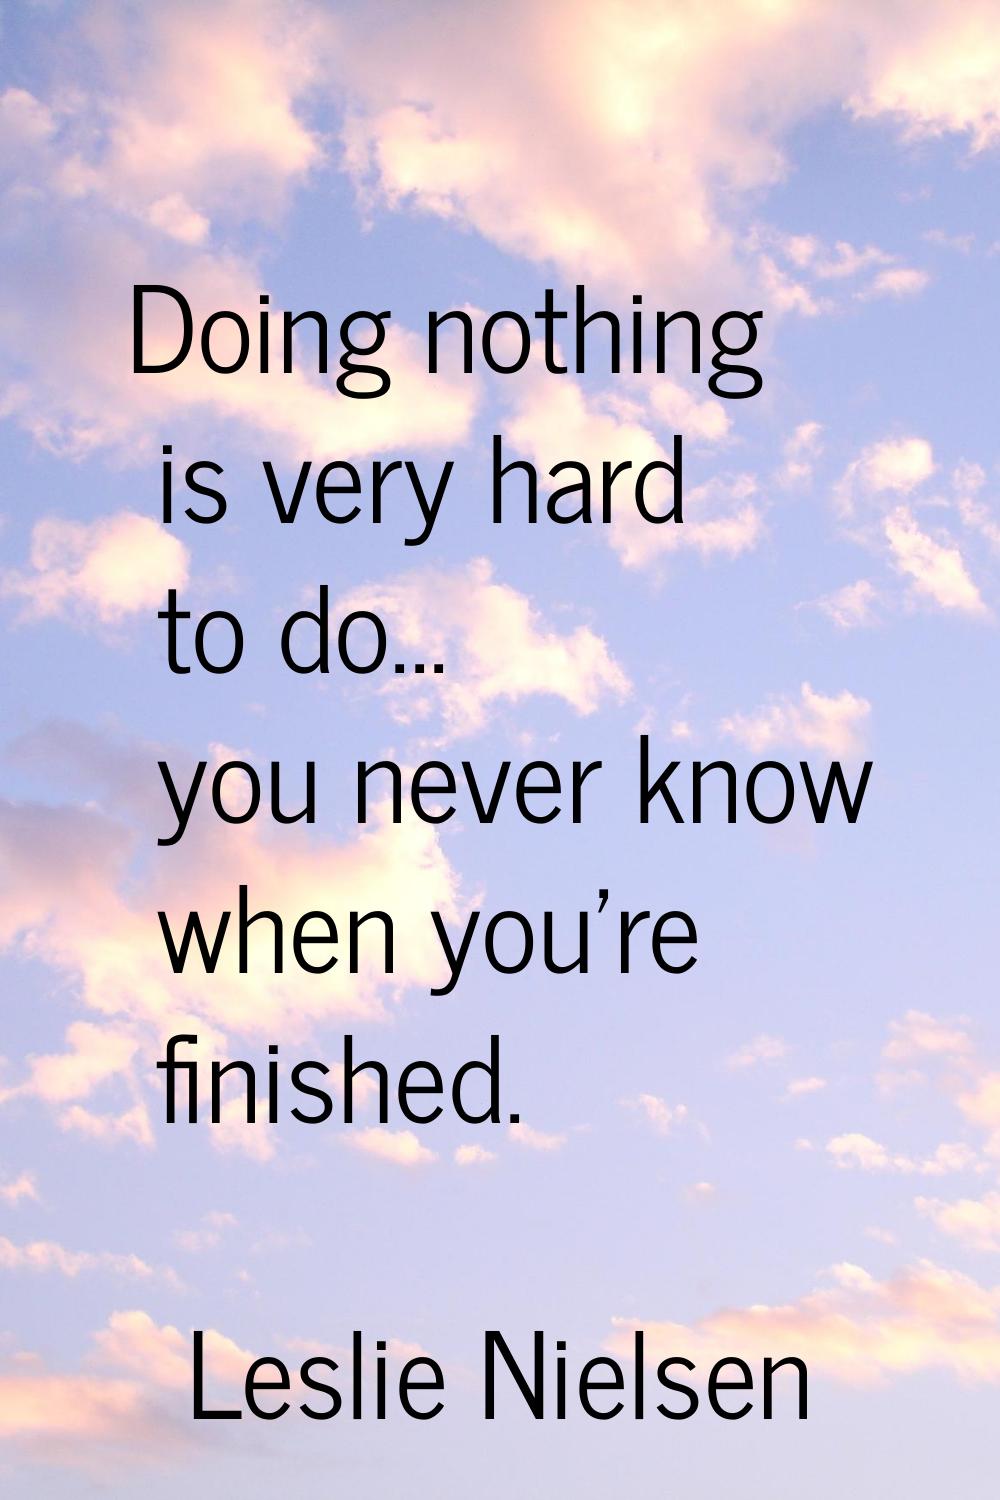 Doing nothing is very hard to do... you never know when you're finished.